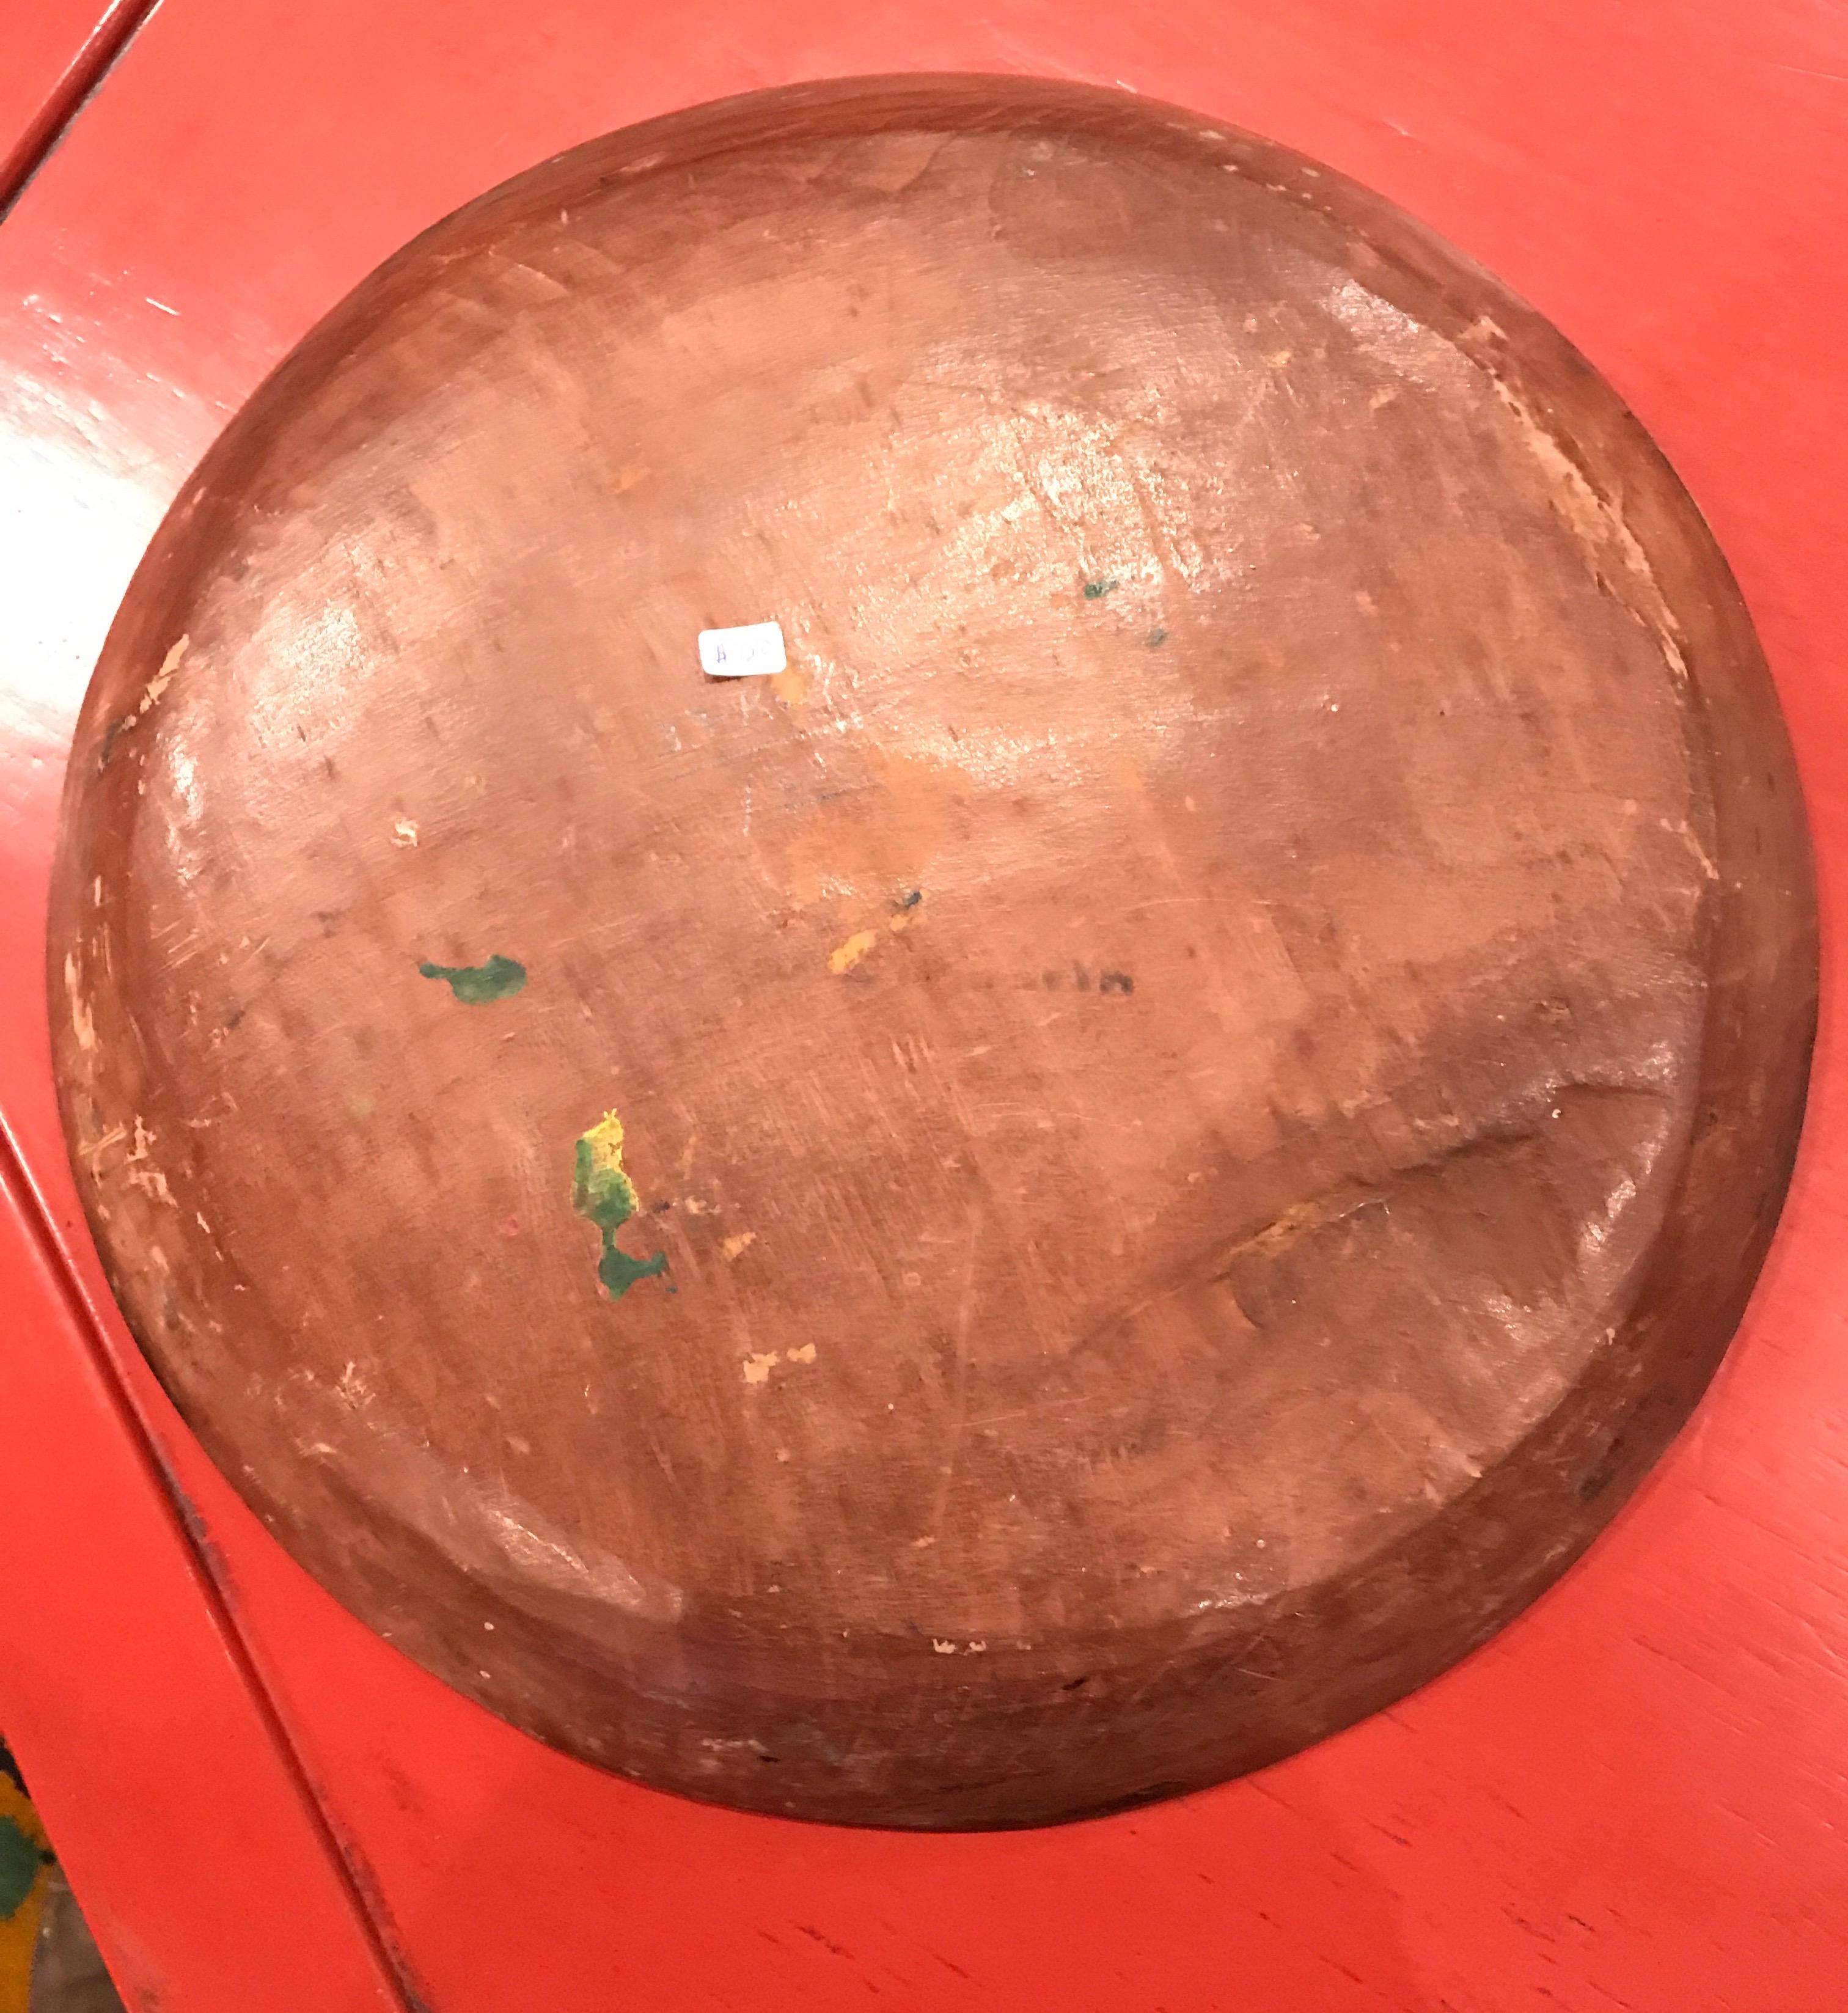 This 14-in. diameter bowl was hand painted in Mexico. The artistic brush strokes are carefully laid out to display color and simplistic brilliance.